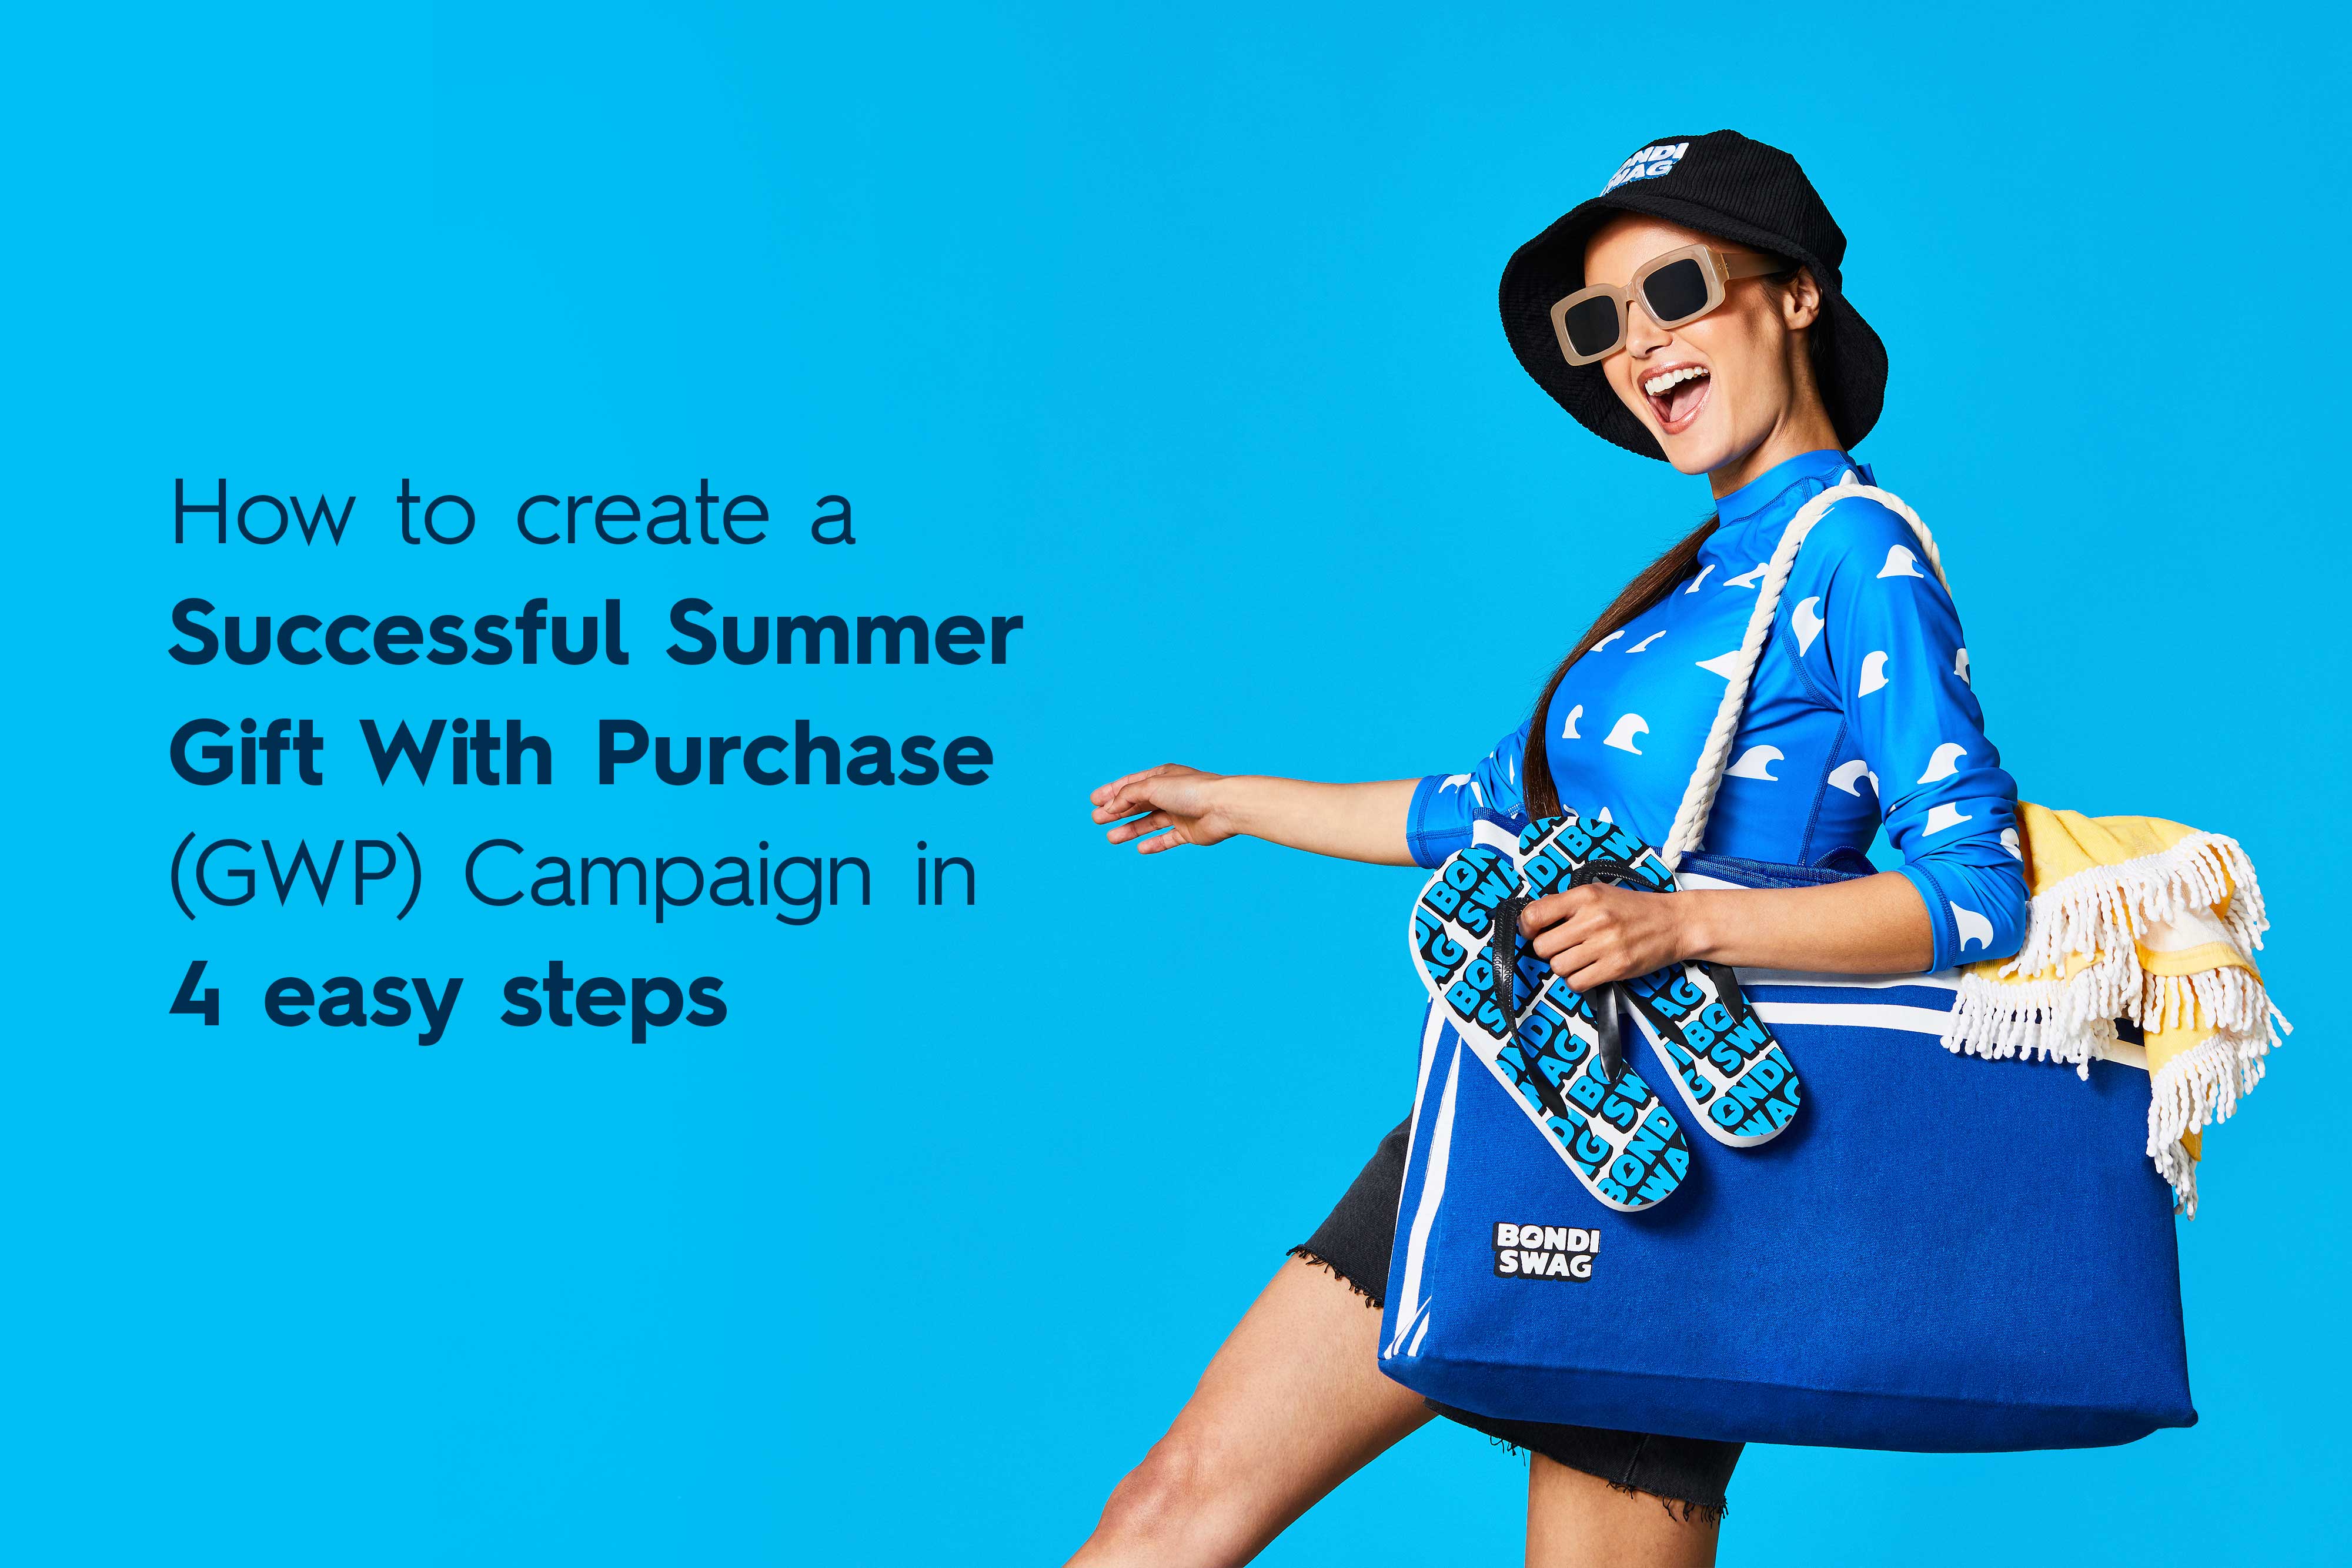 4 Steps to a Successful Summer Gift With Purchase (GWP) Campaign